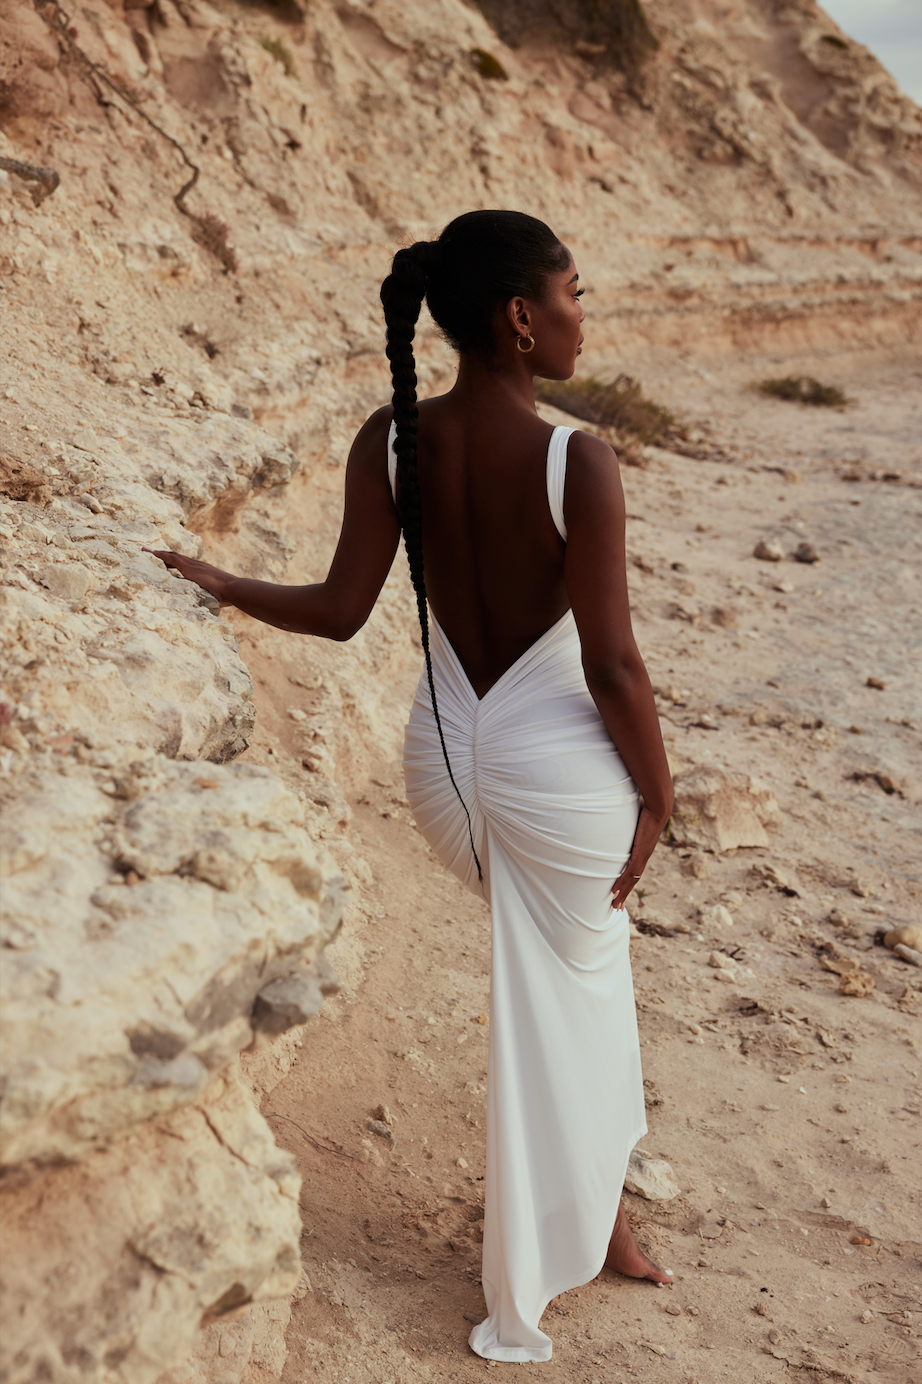 MÉLANI The Label SABIA White Ruched Bum Backless Dress